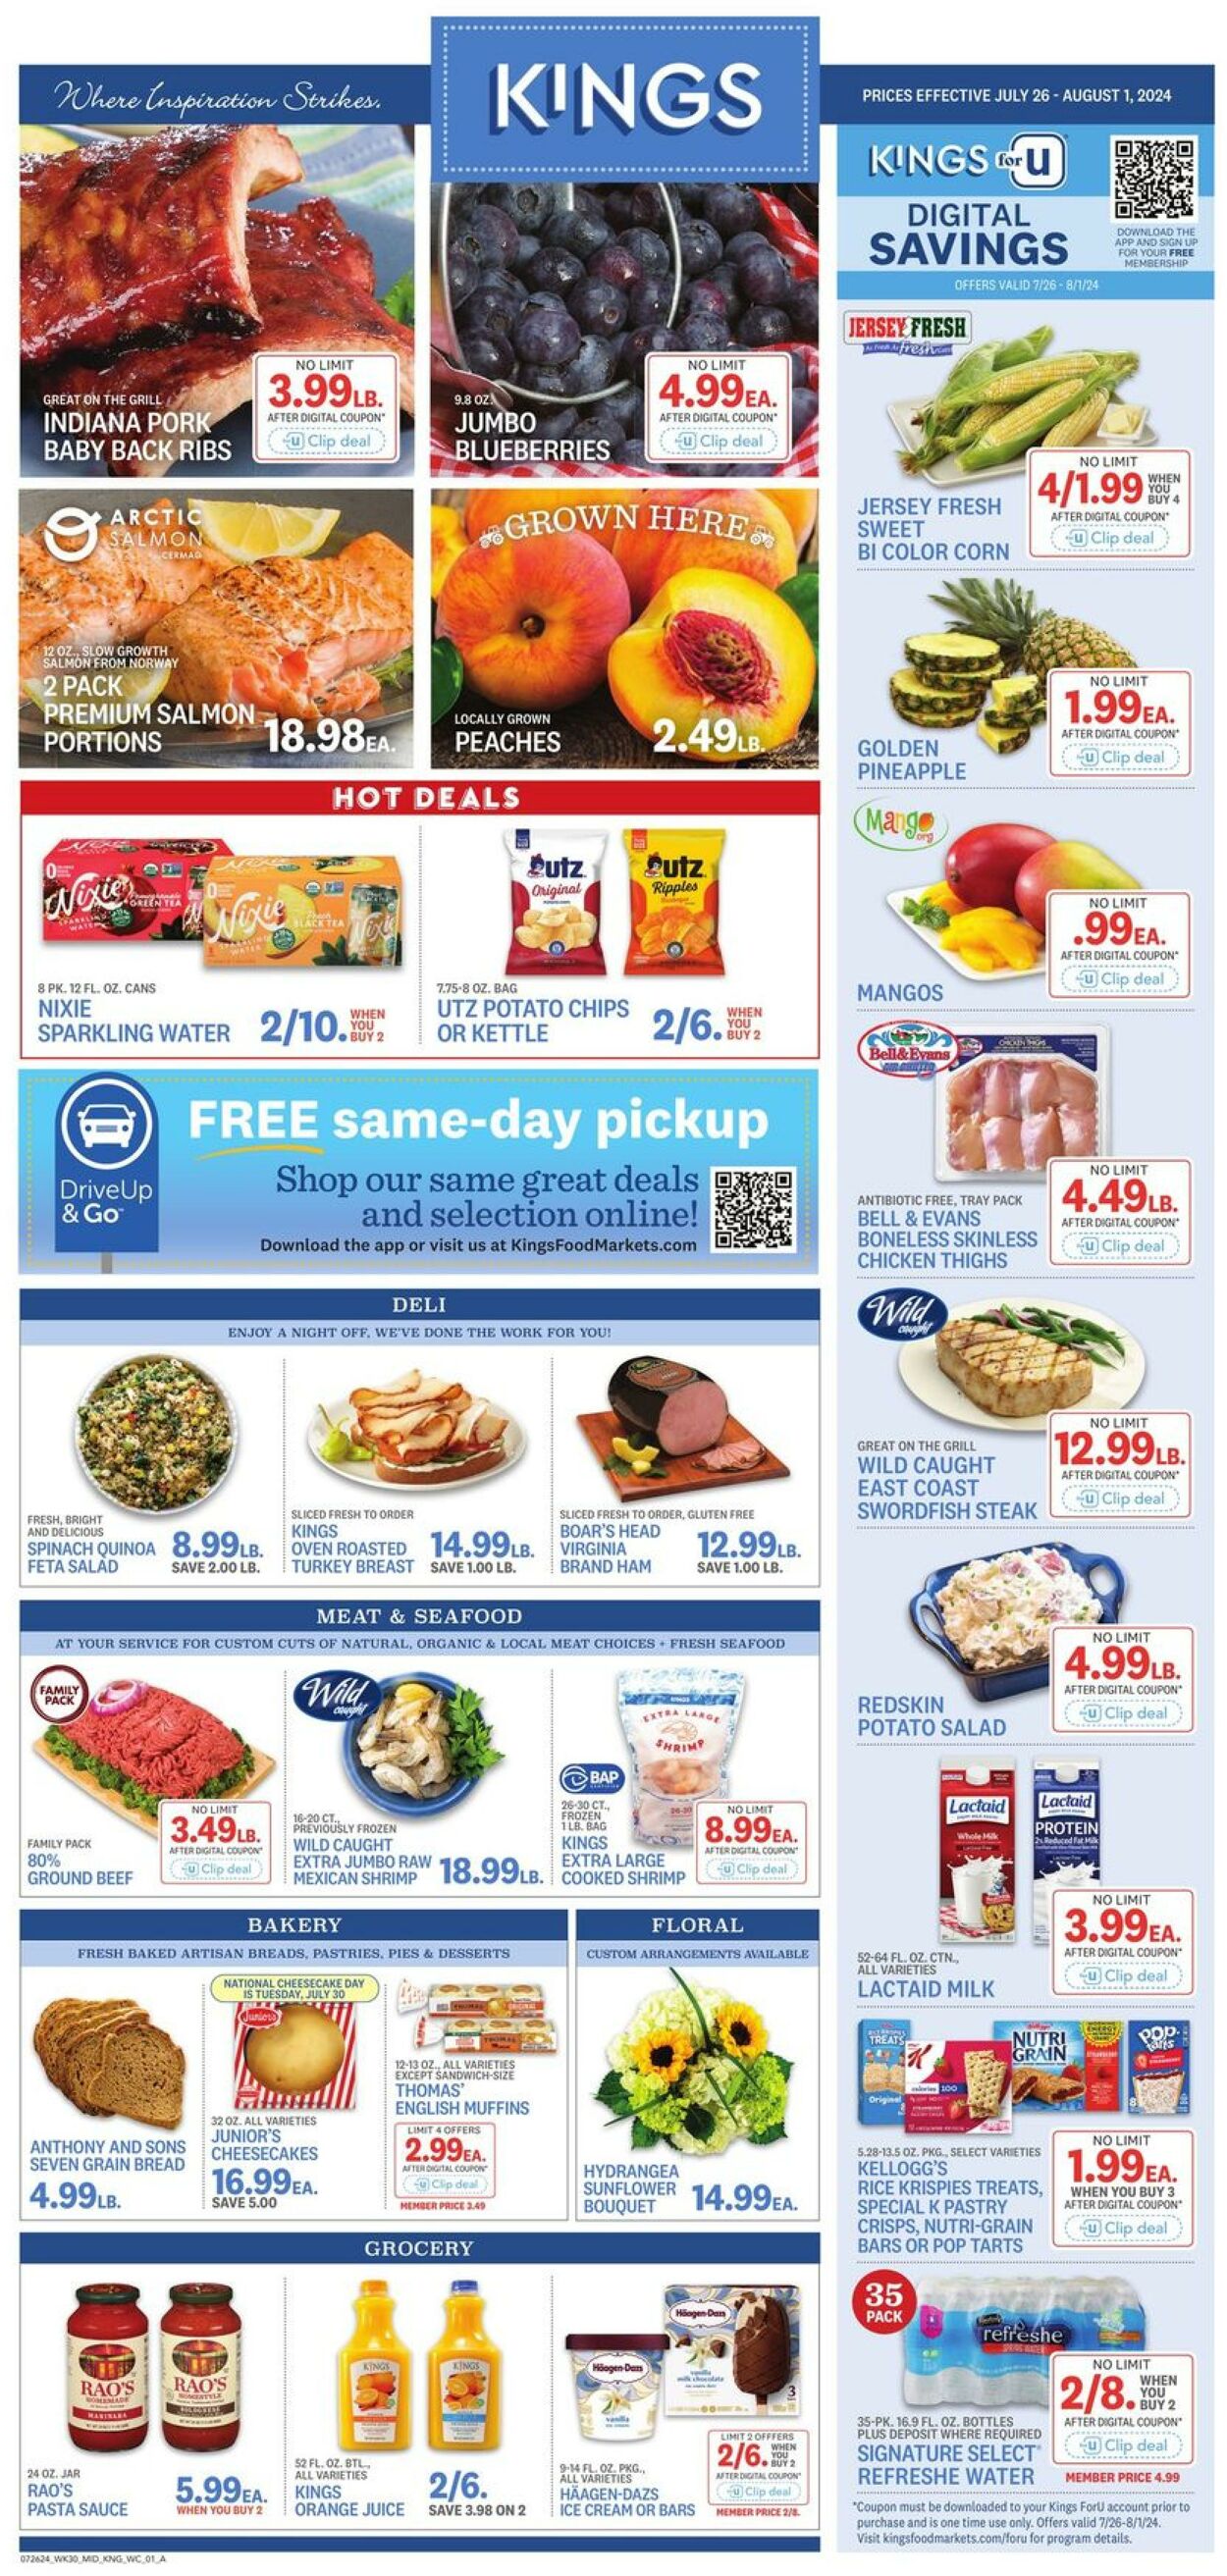 Kings Food Markets Promotional weekly ads